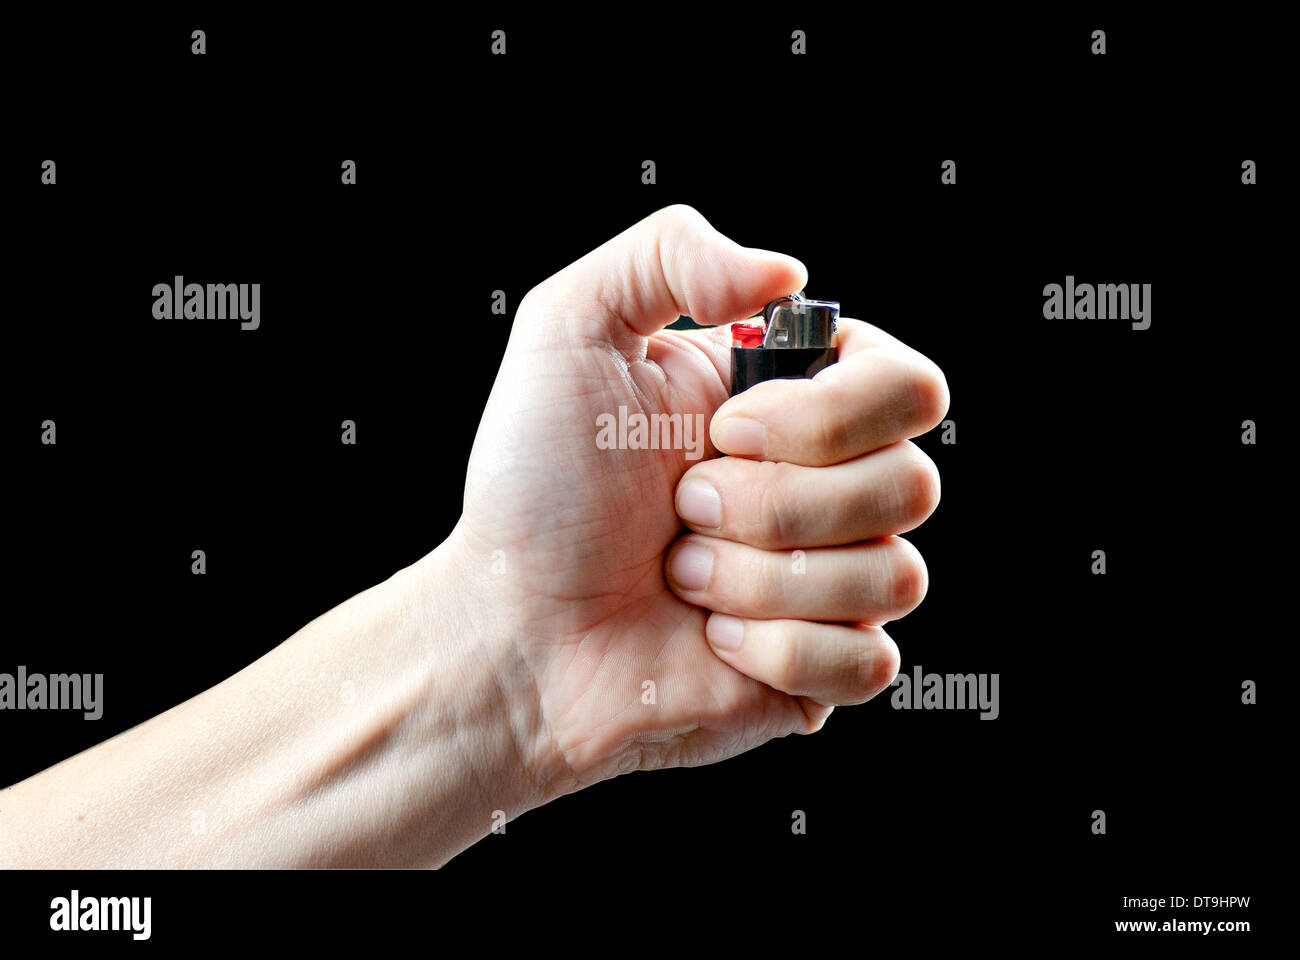 Close-up of a man's hand about to light a lighter. Stock Photo